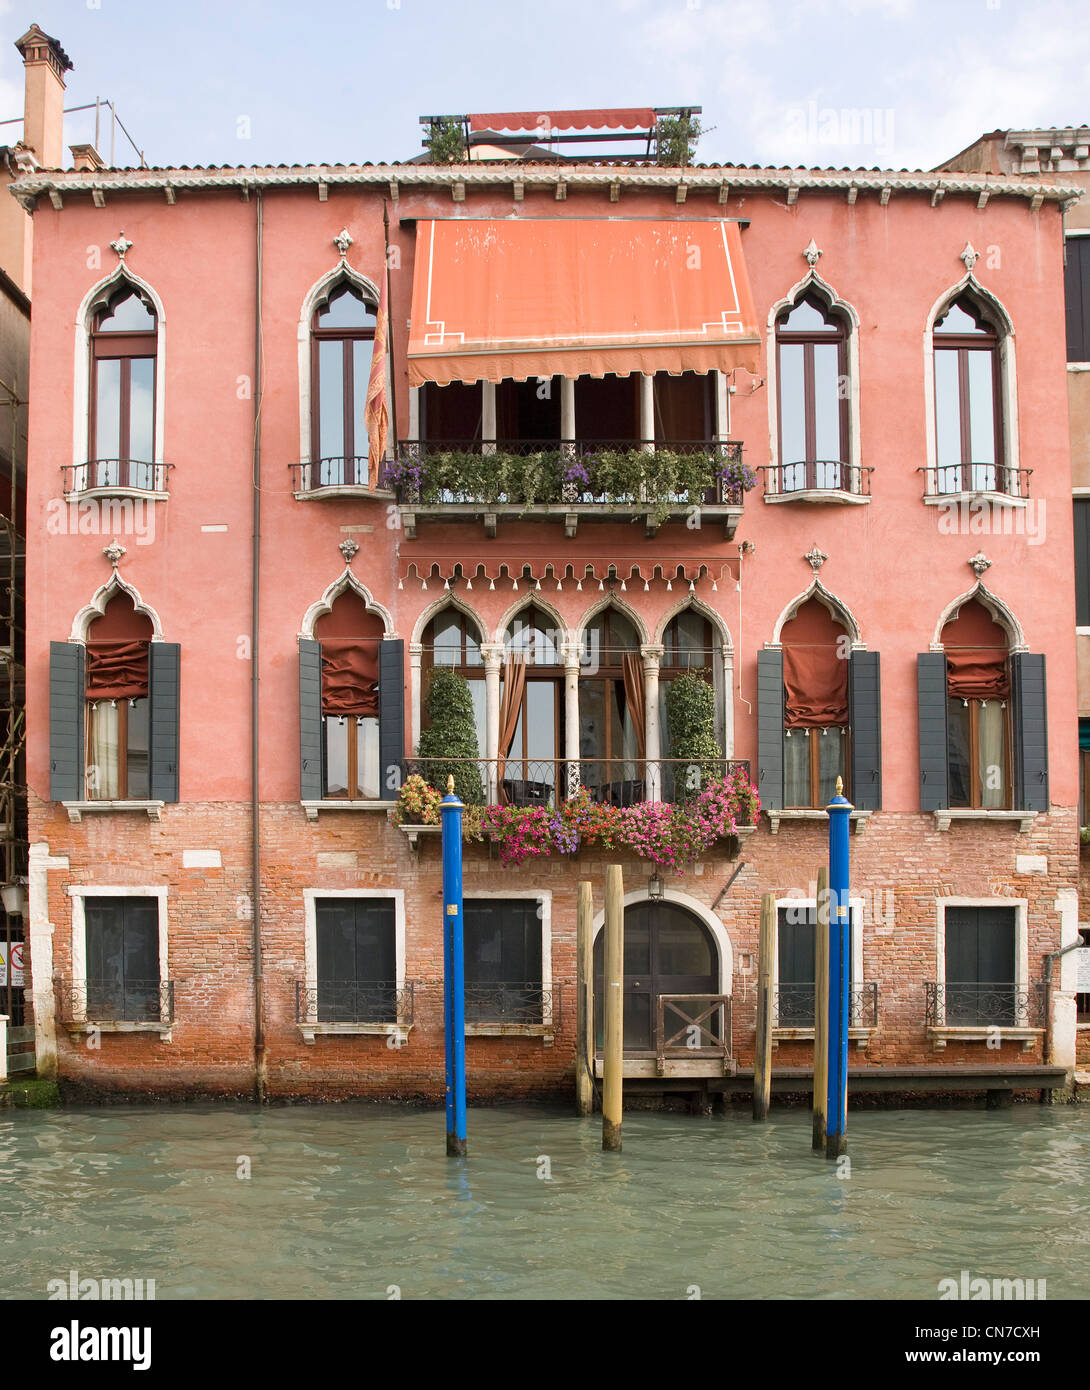 Pink Moorish style canal side house, Grand canal, Venice, Italy Stock Photo